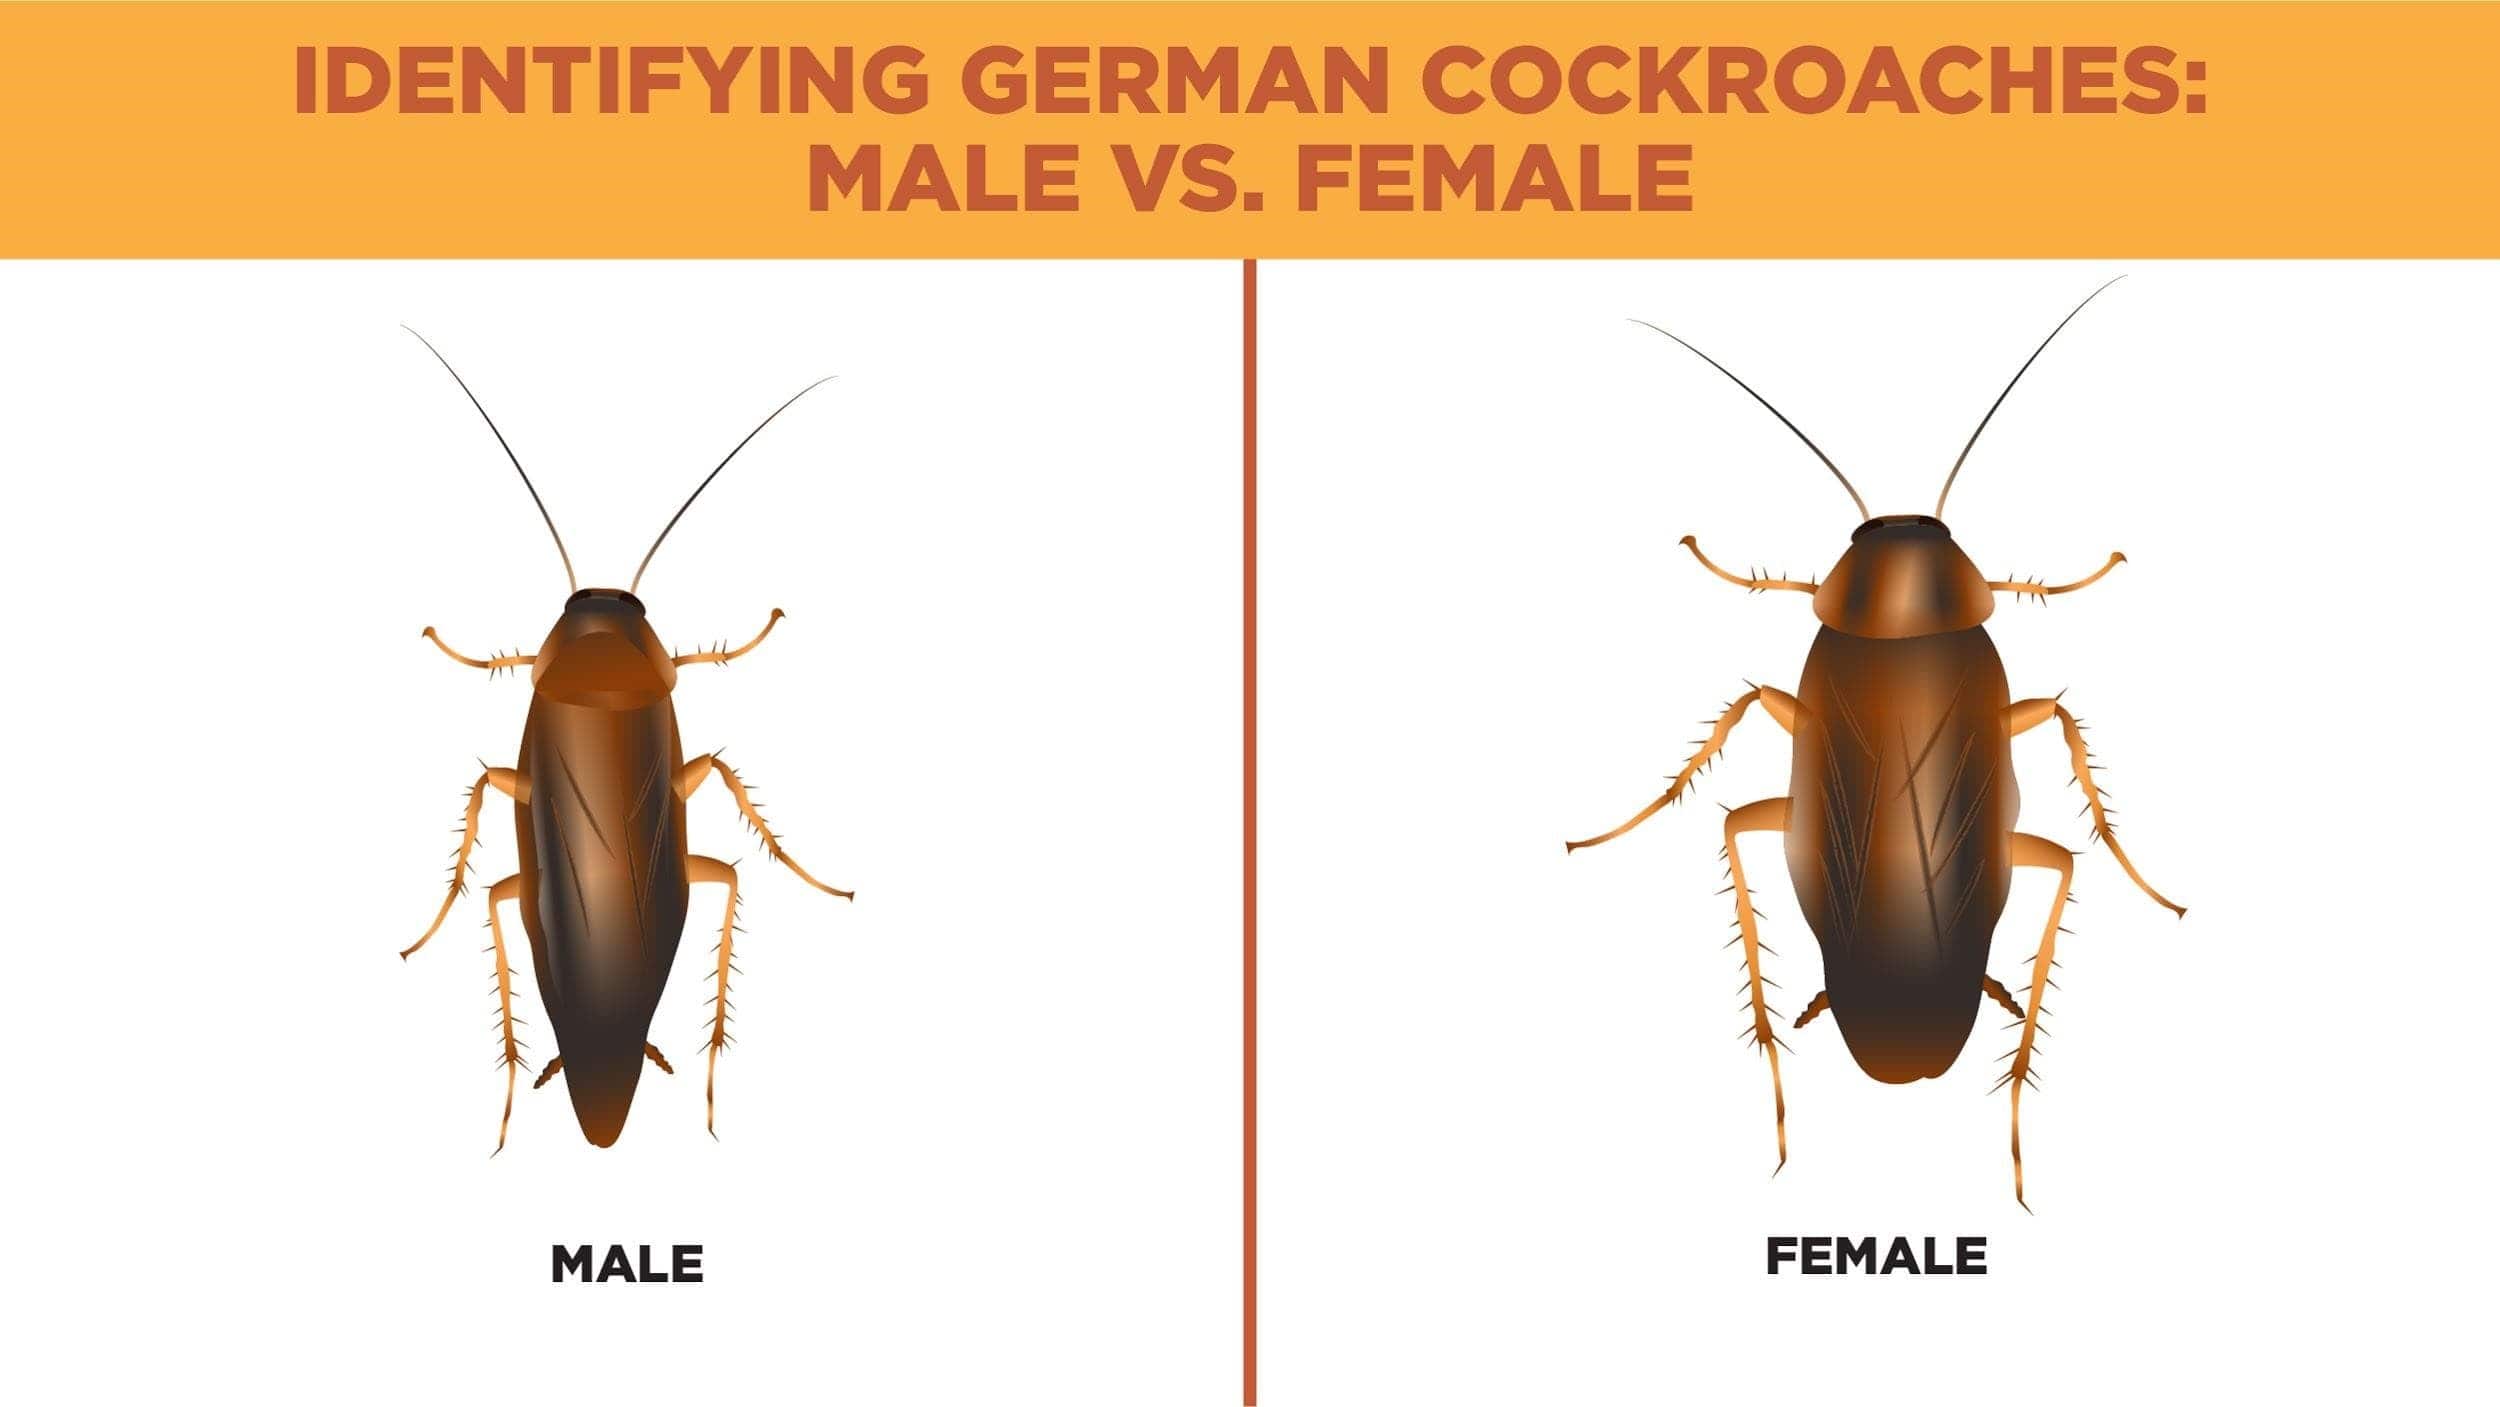 What Does a Male Cockroach Look Like?